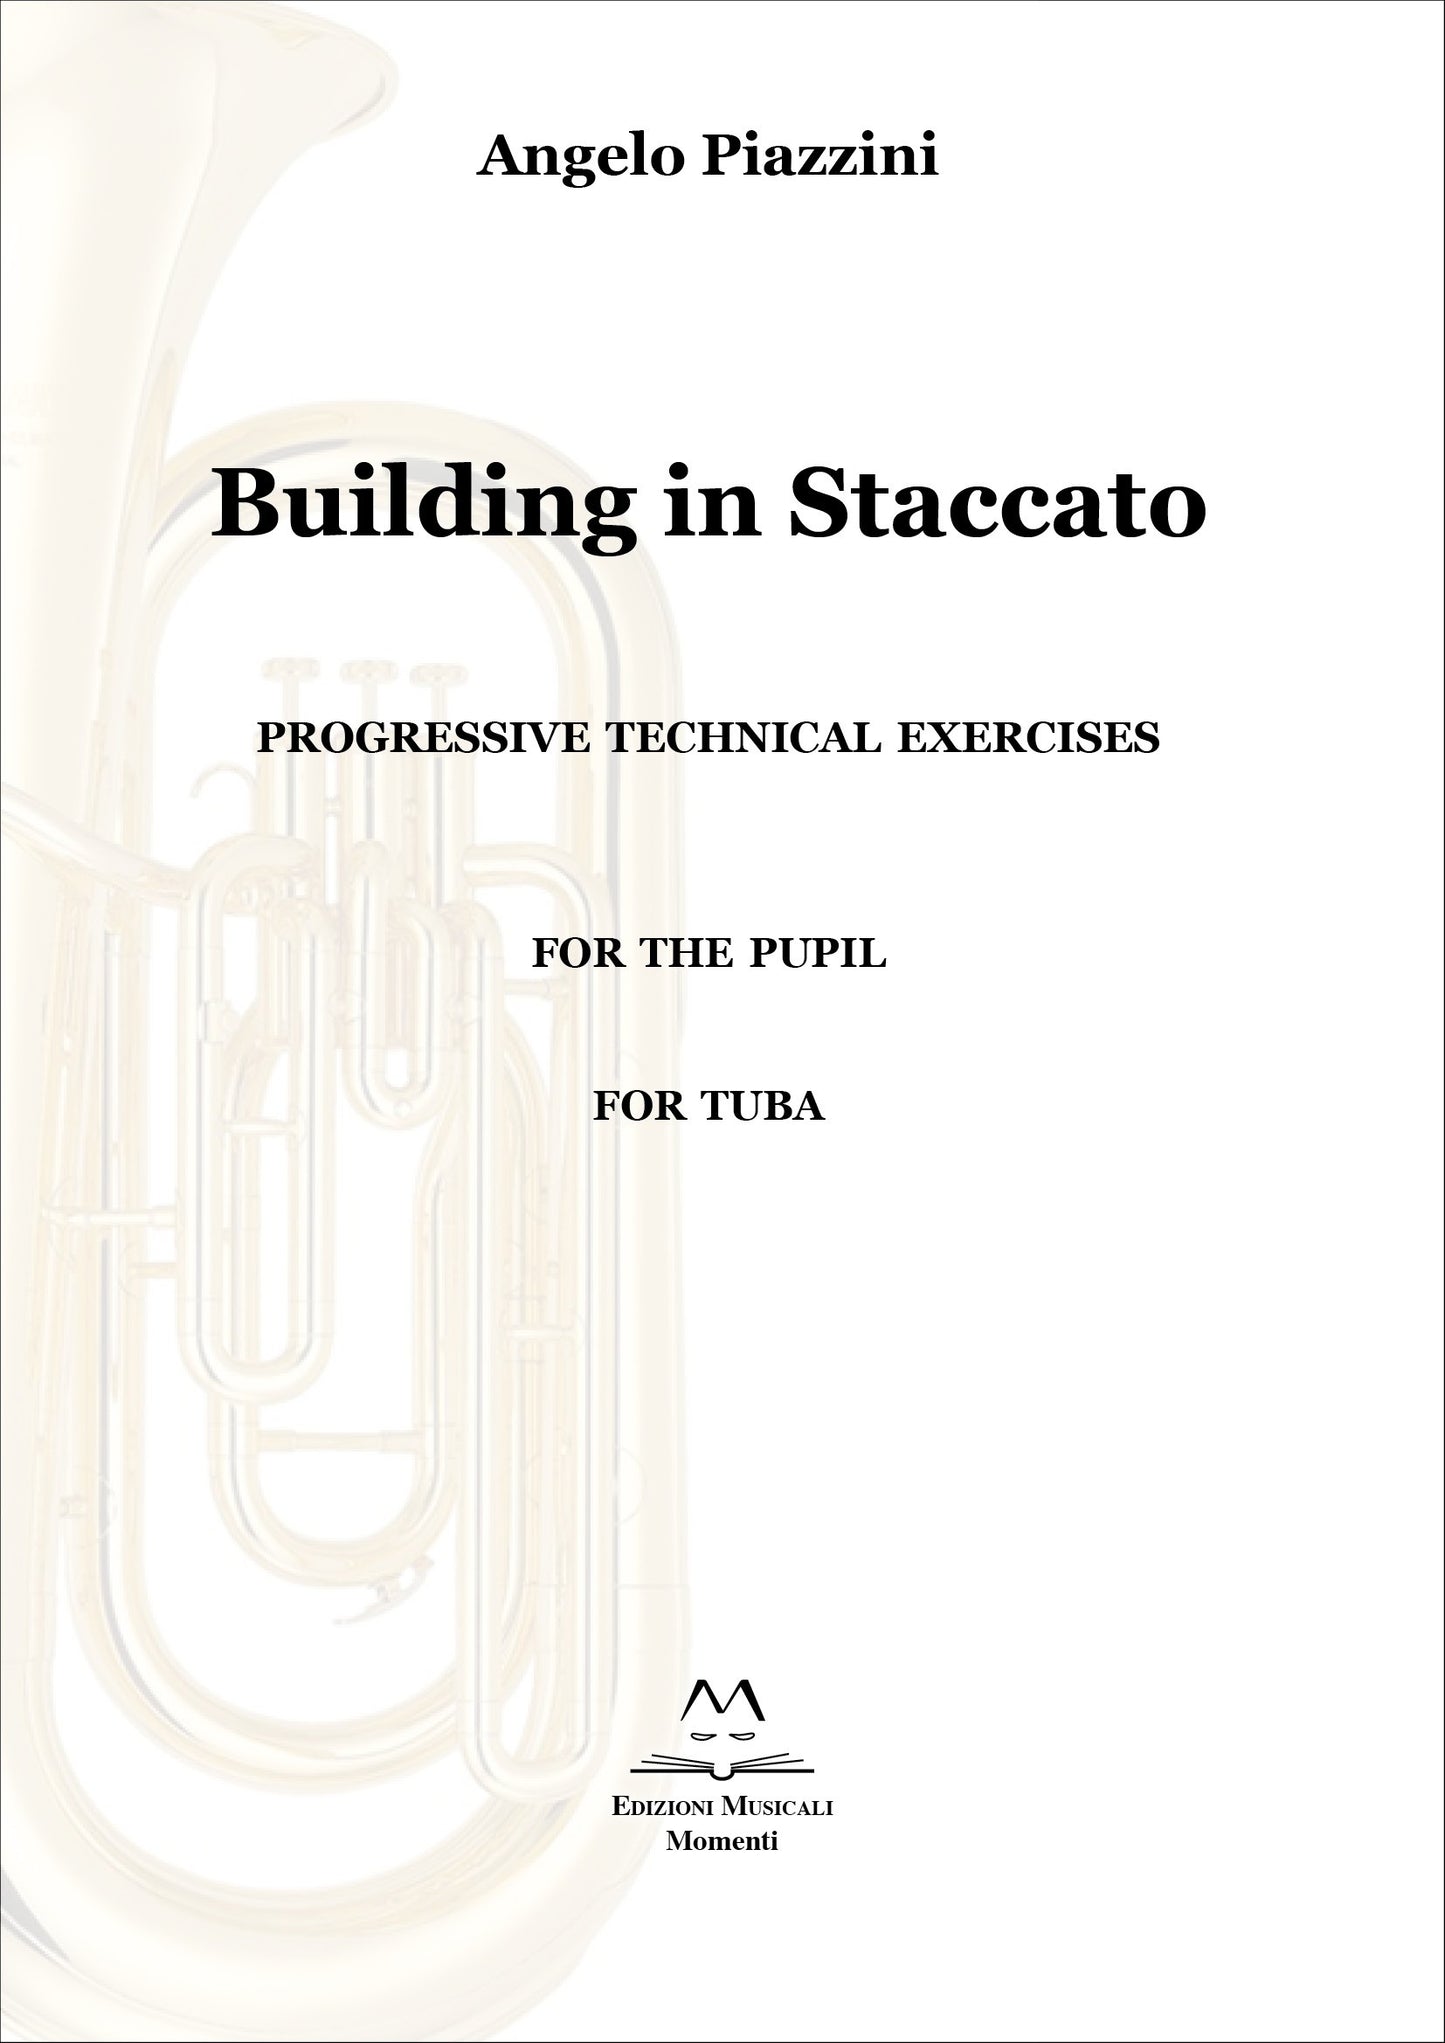 Building in Staccato for the pupil di Angelo Piazzini